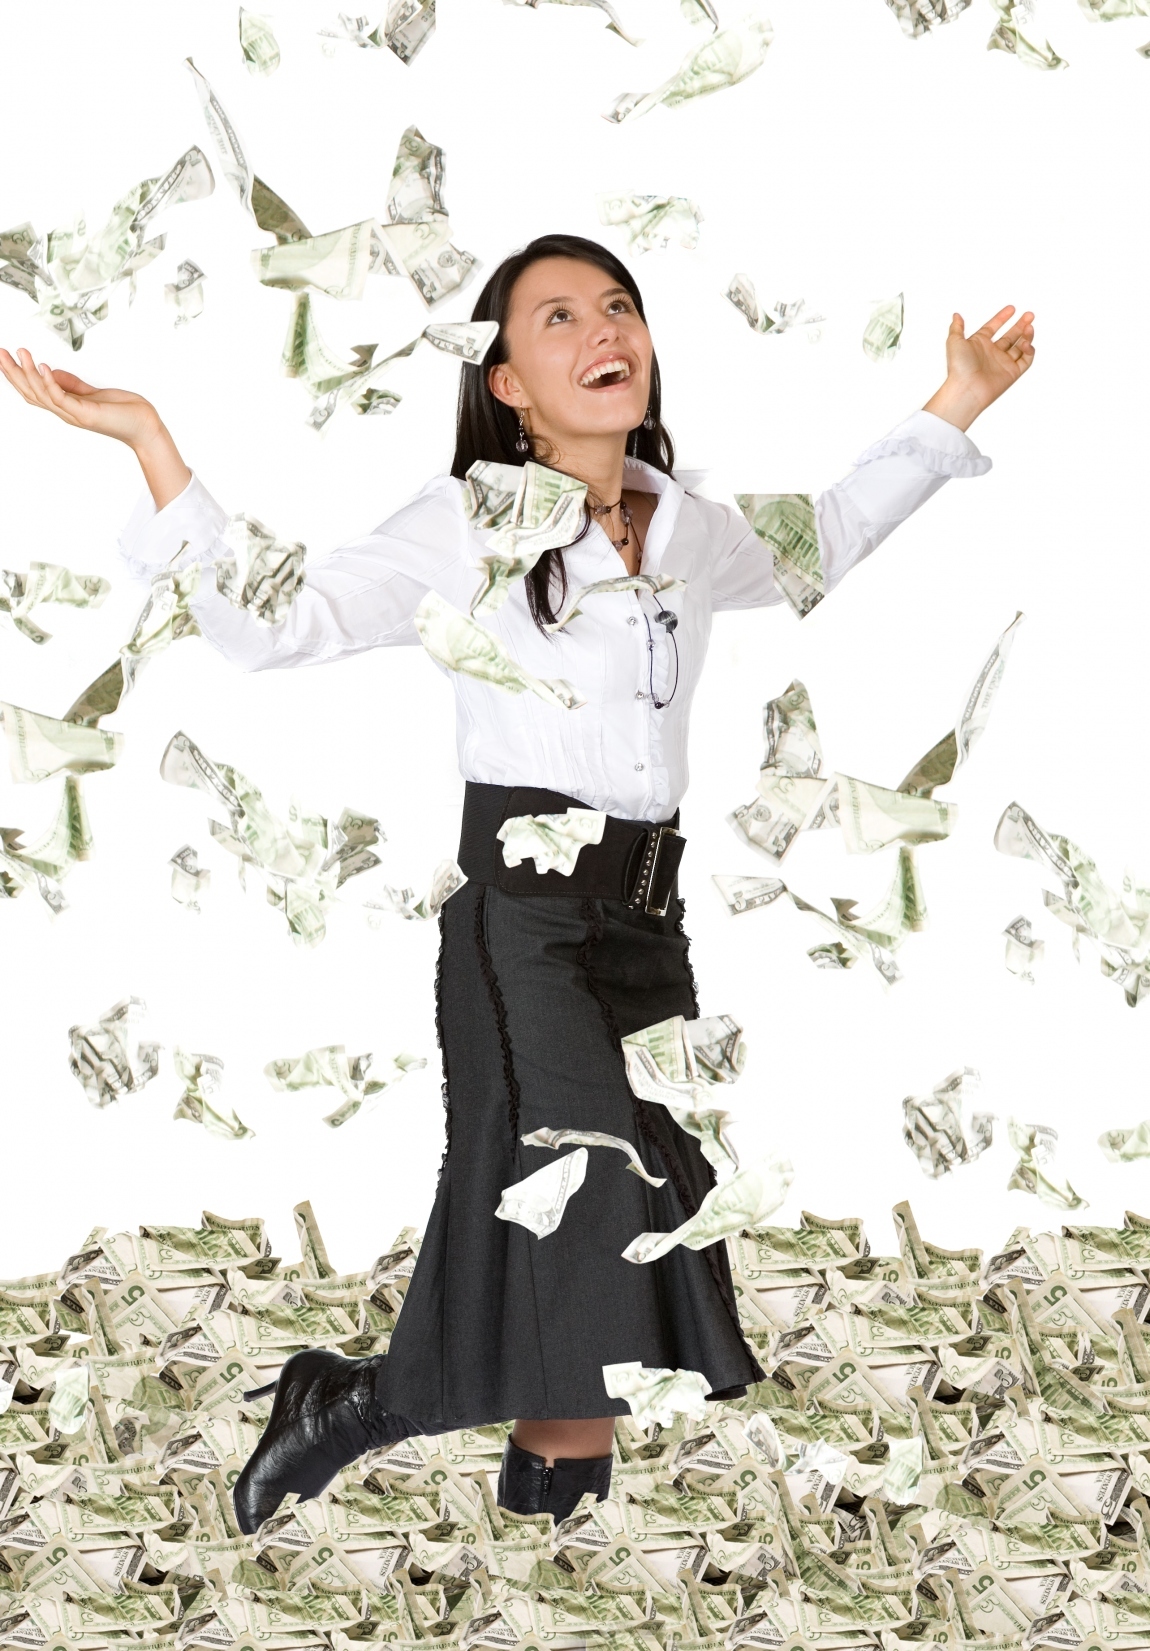 Show Me the Money! Wedding Traditions without the Wage Gap 